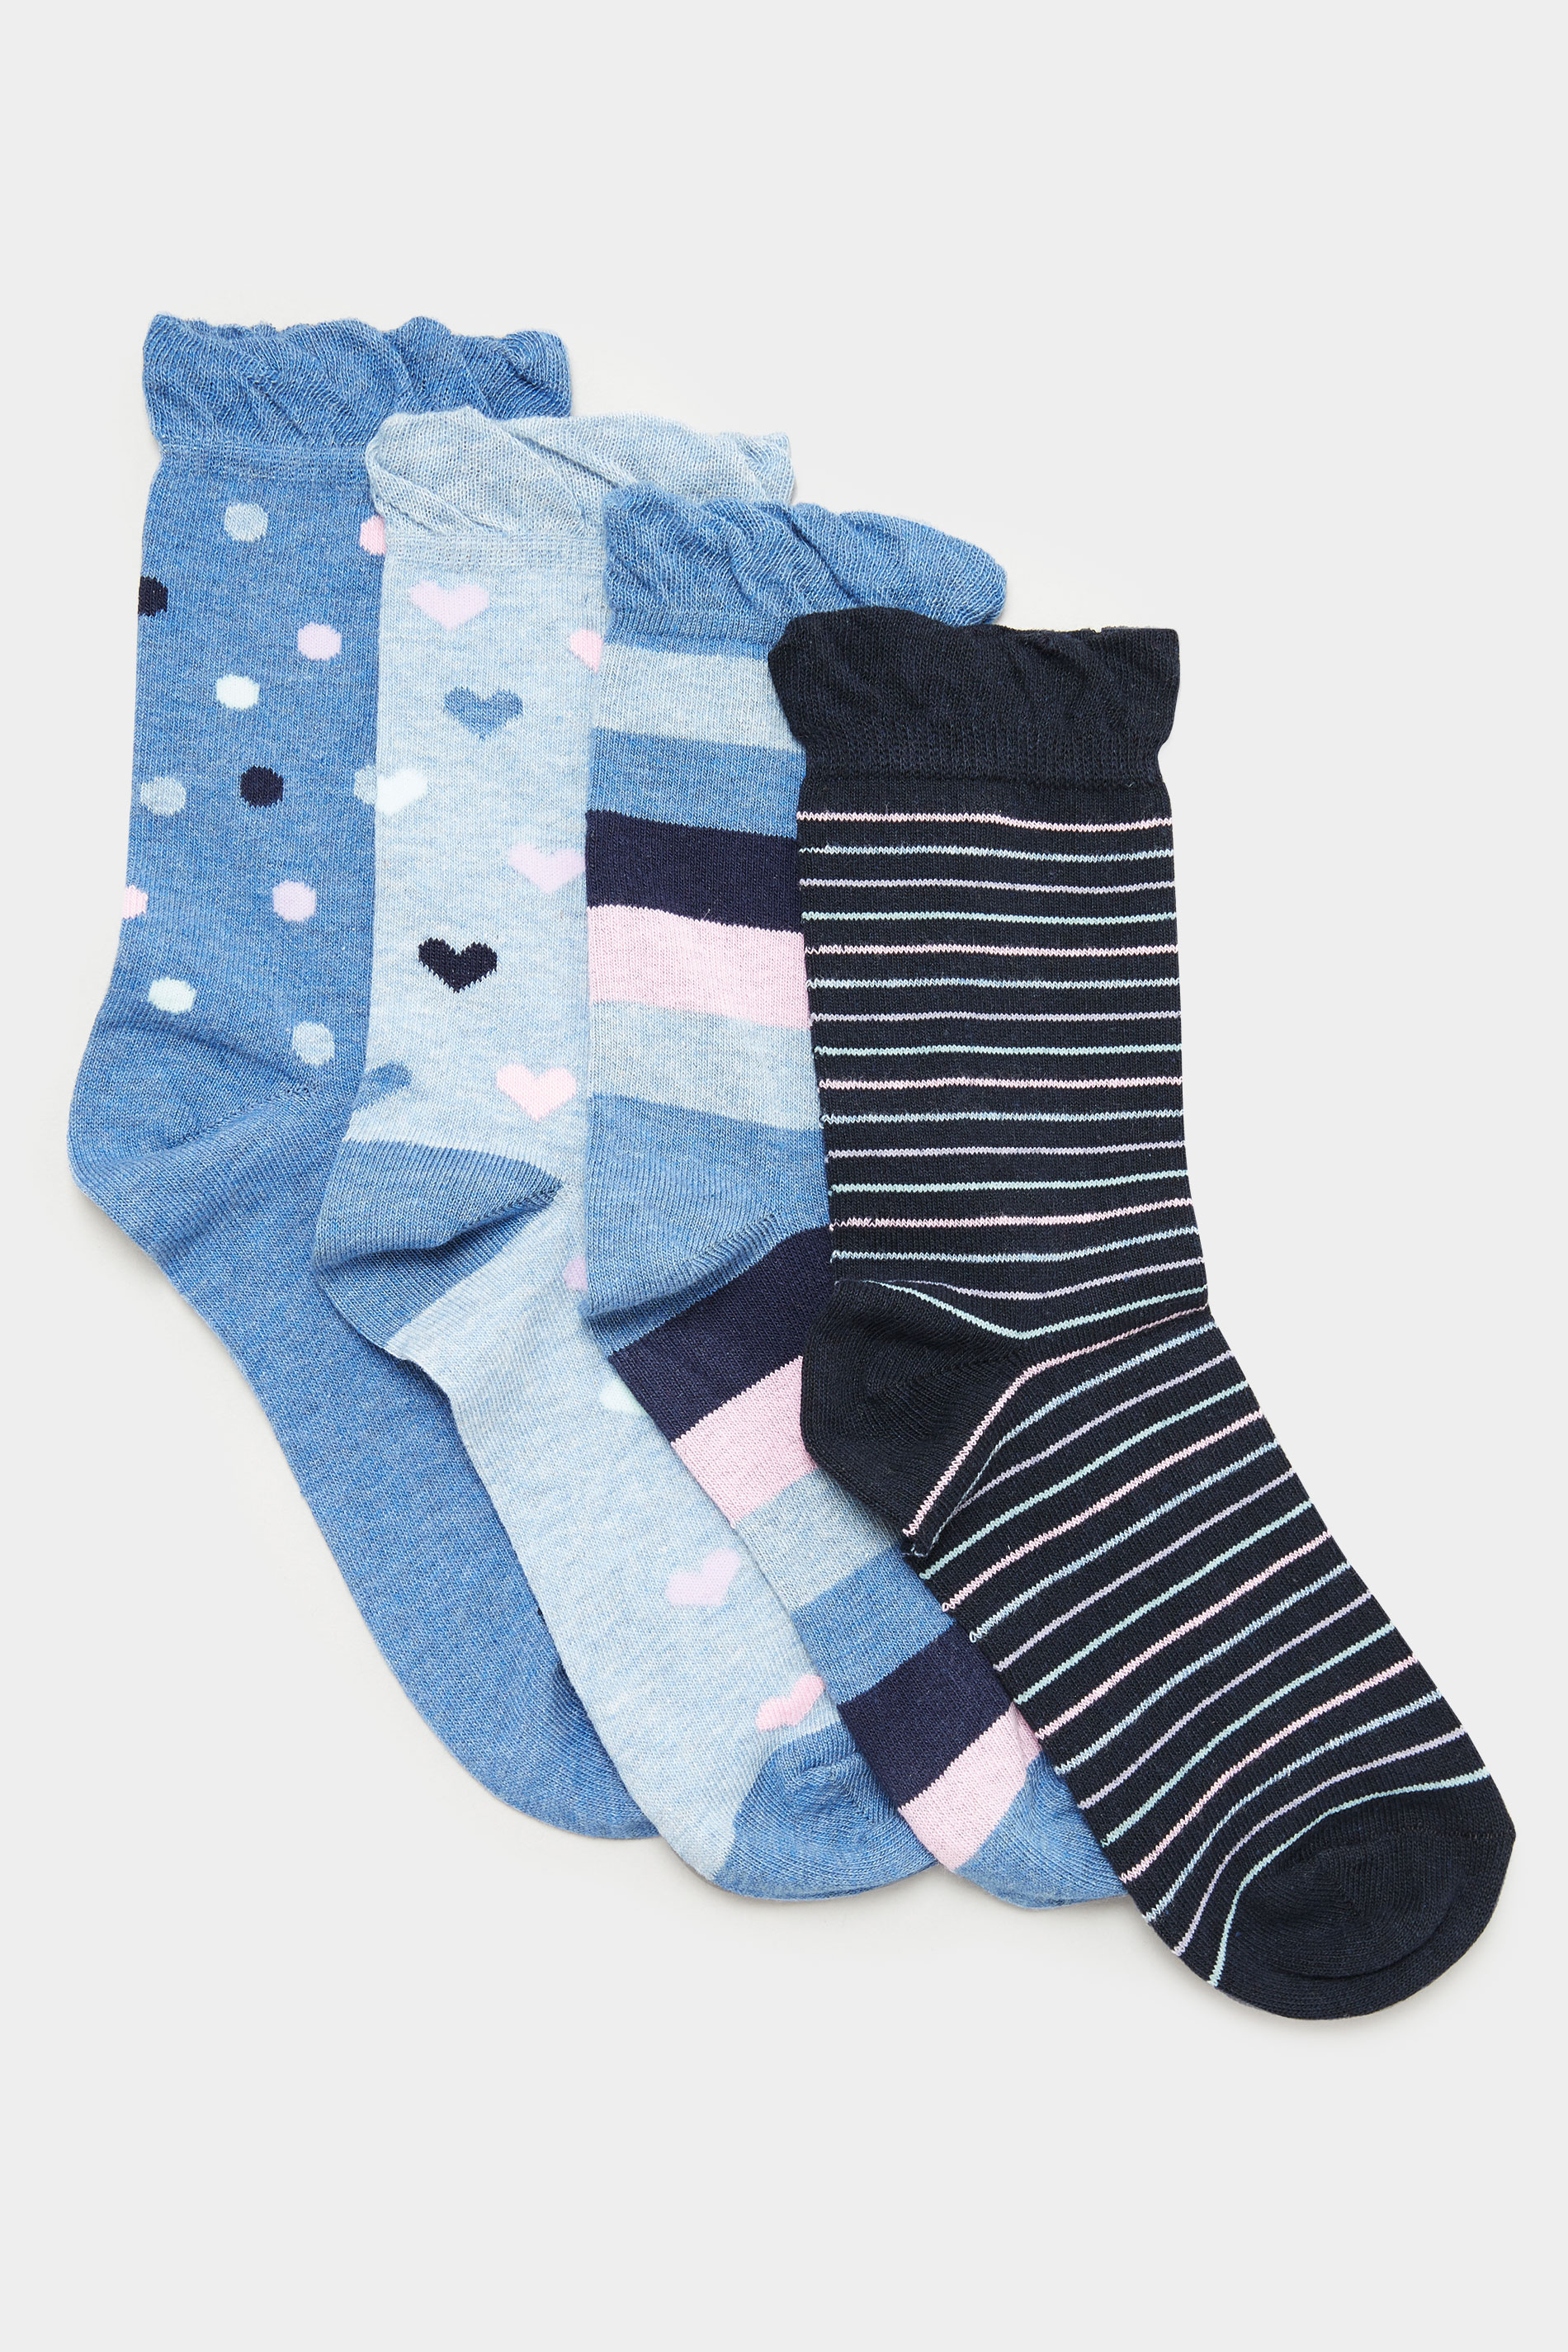 4 PACK Blue Stripe & Heart Ankle Socks | Yours Clothing